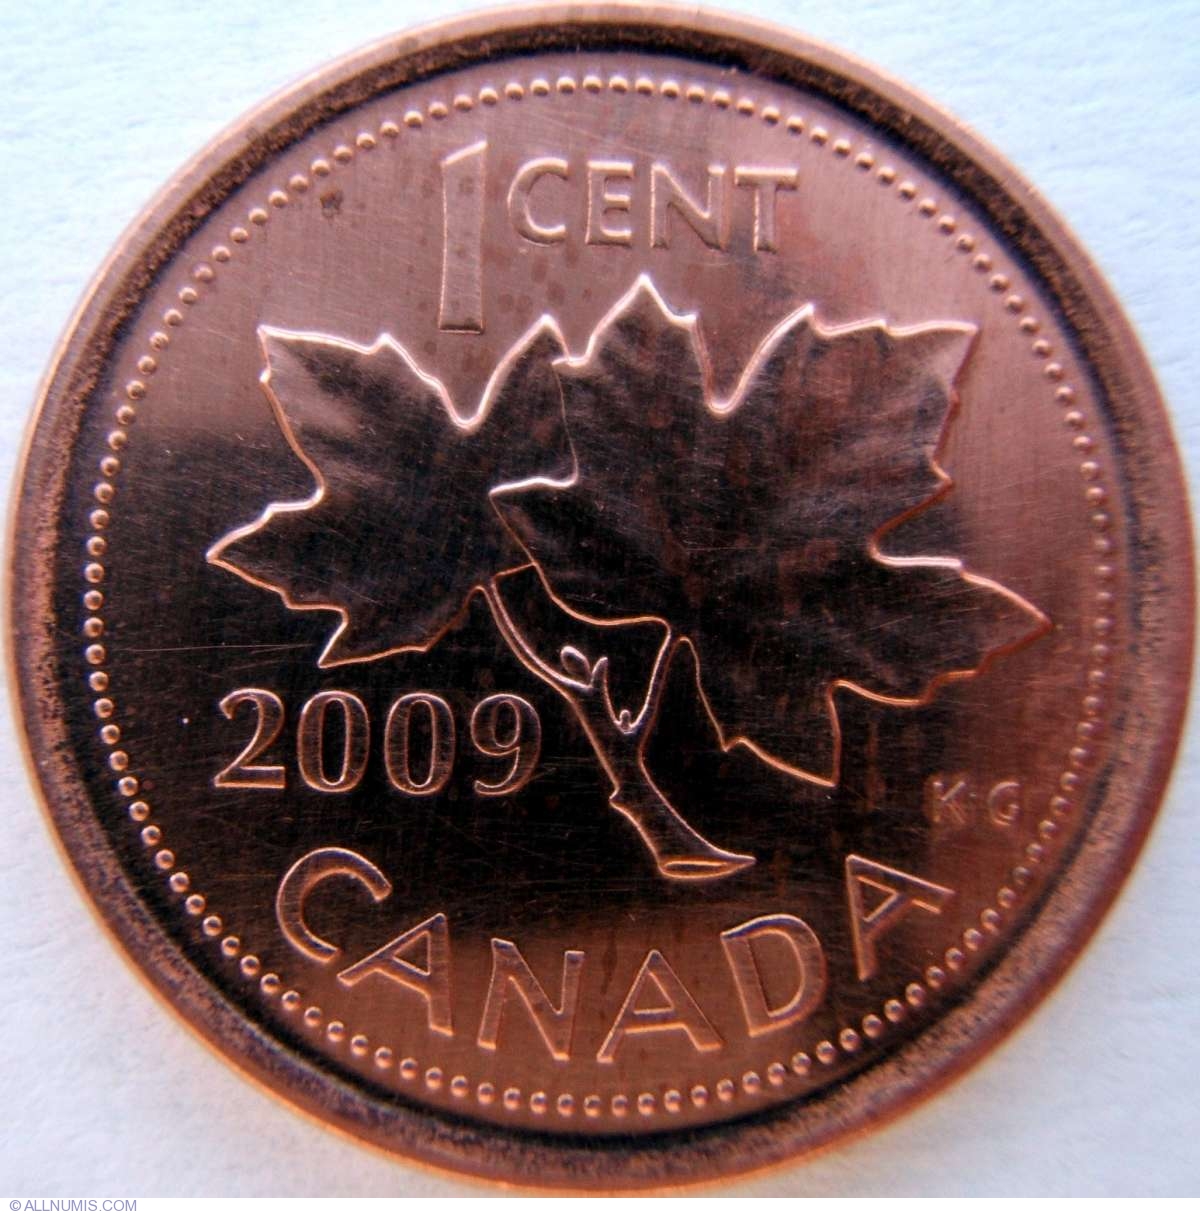 Circu Details about   Canada 2009 L 1 Cent  Canadian Penny Coin Magnetic & Non Magnetic 2 coins 